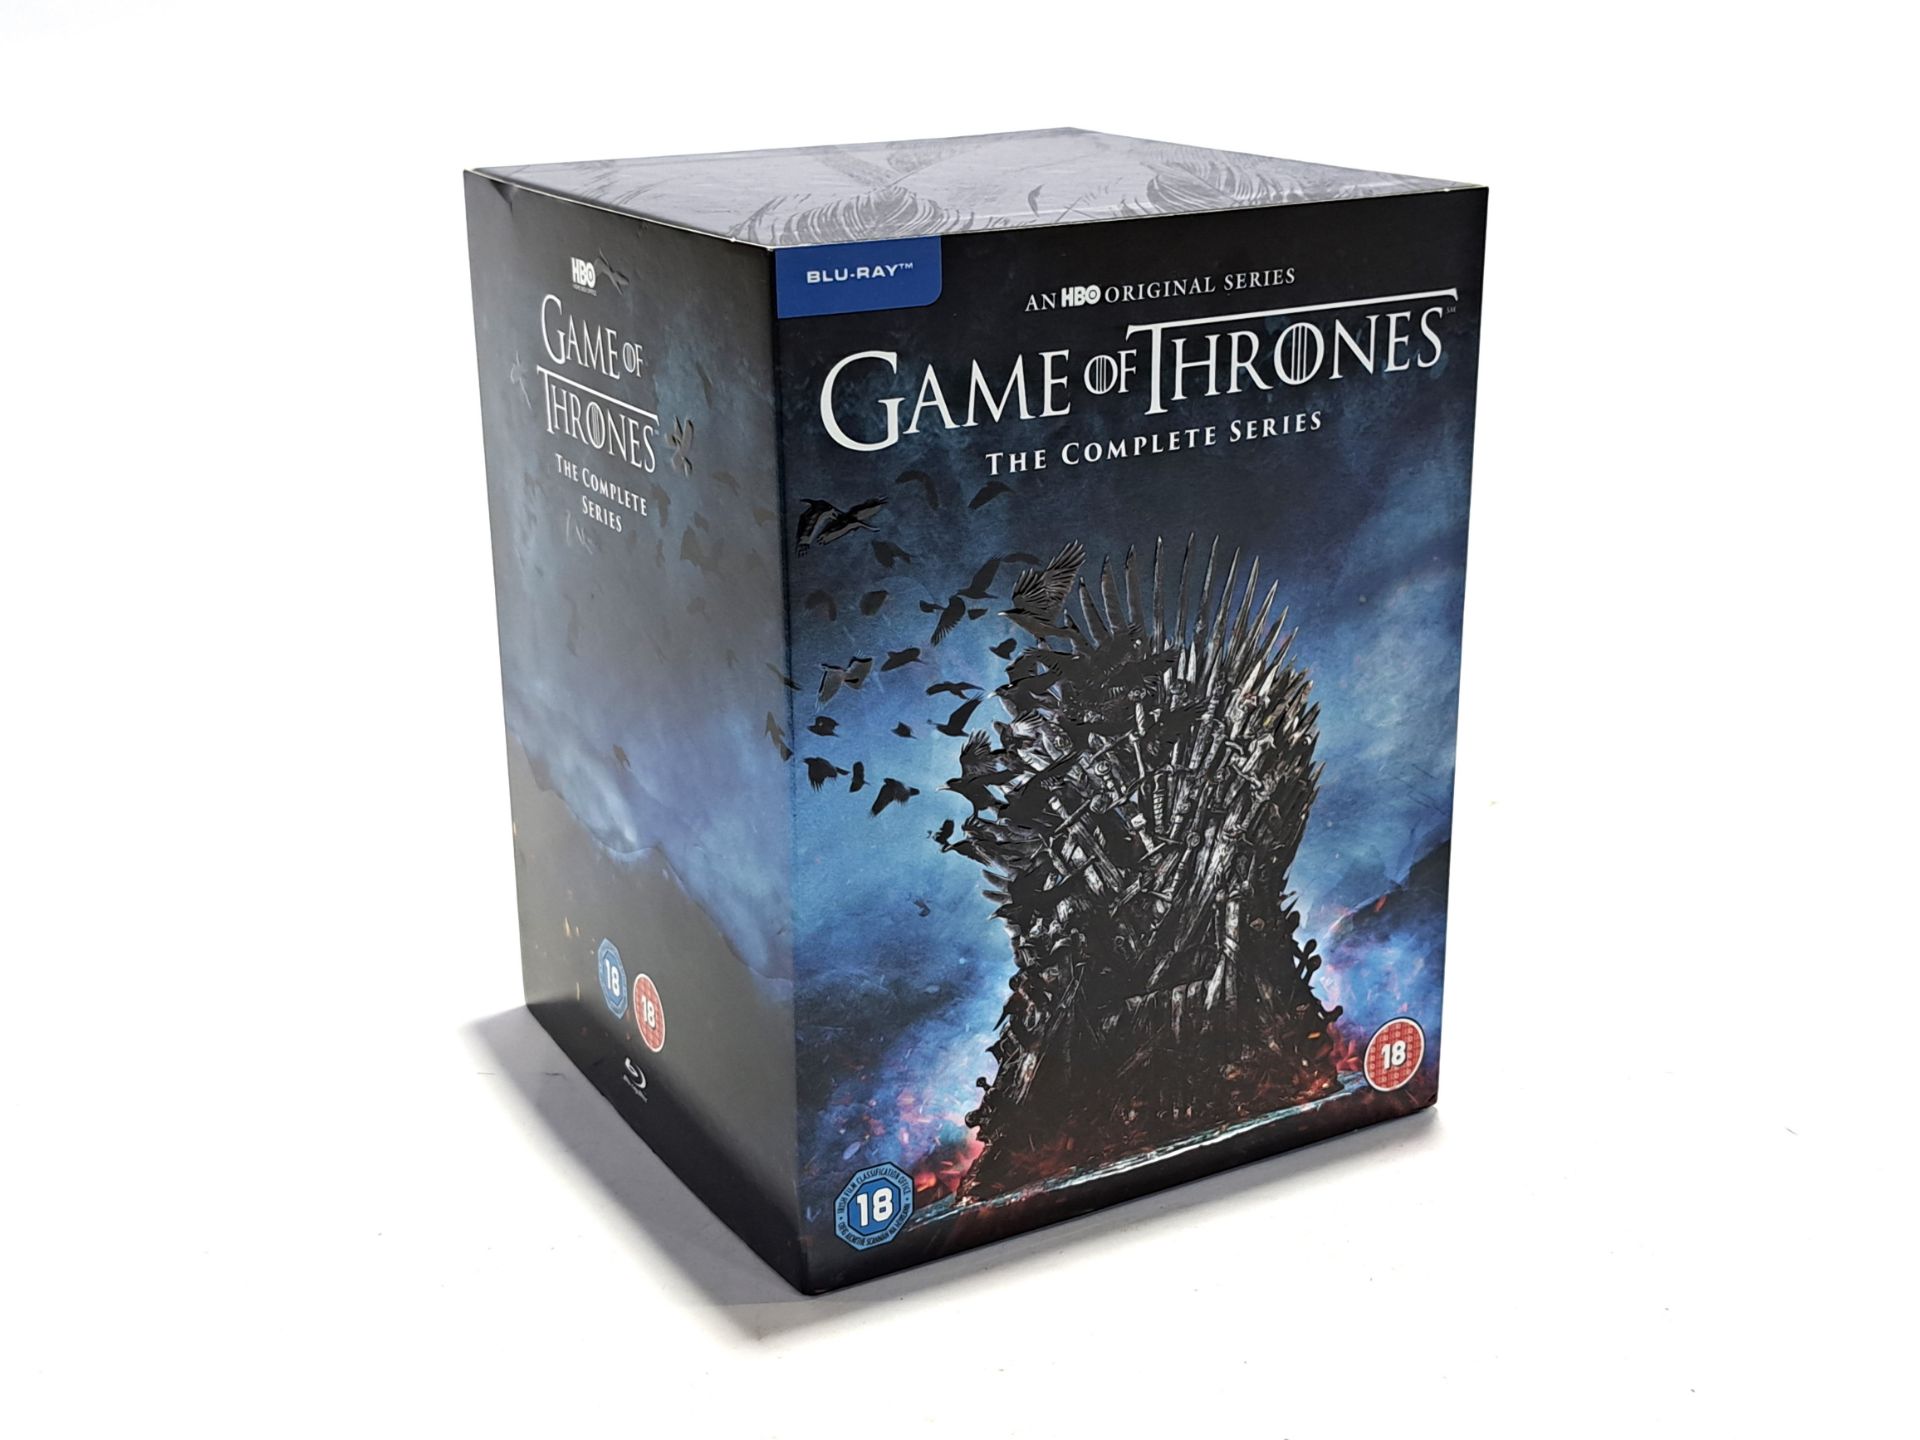 The Game of Thrones The Complete Series Blu-Ray Boxset